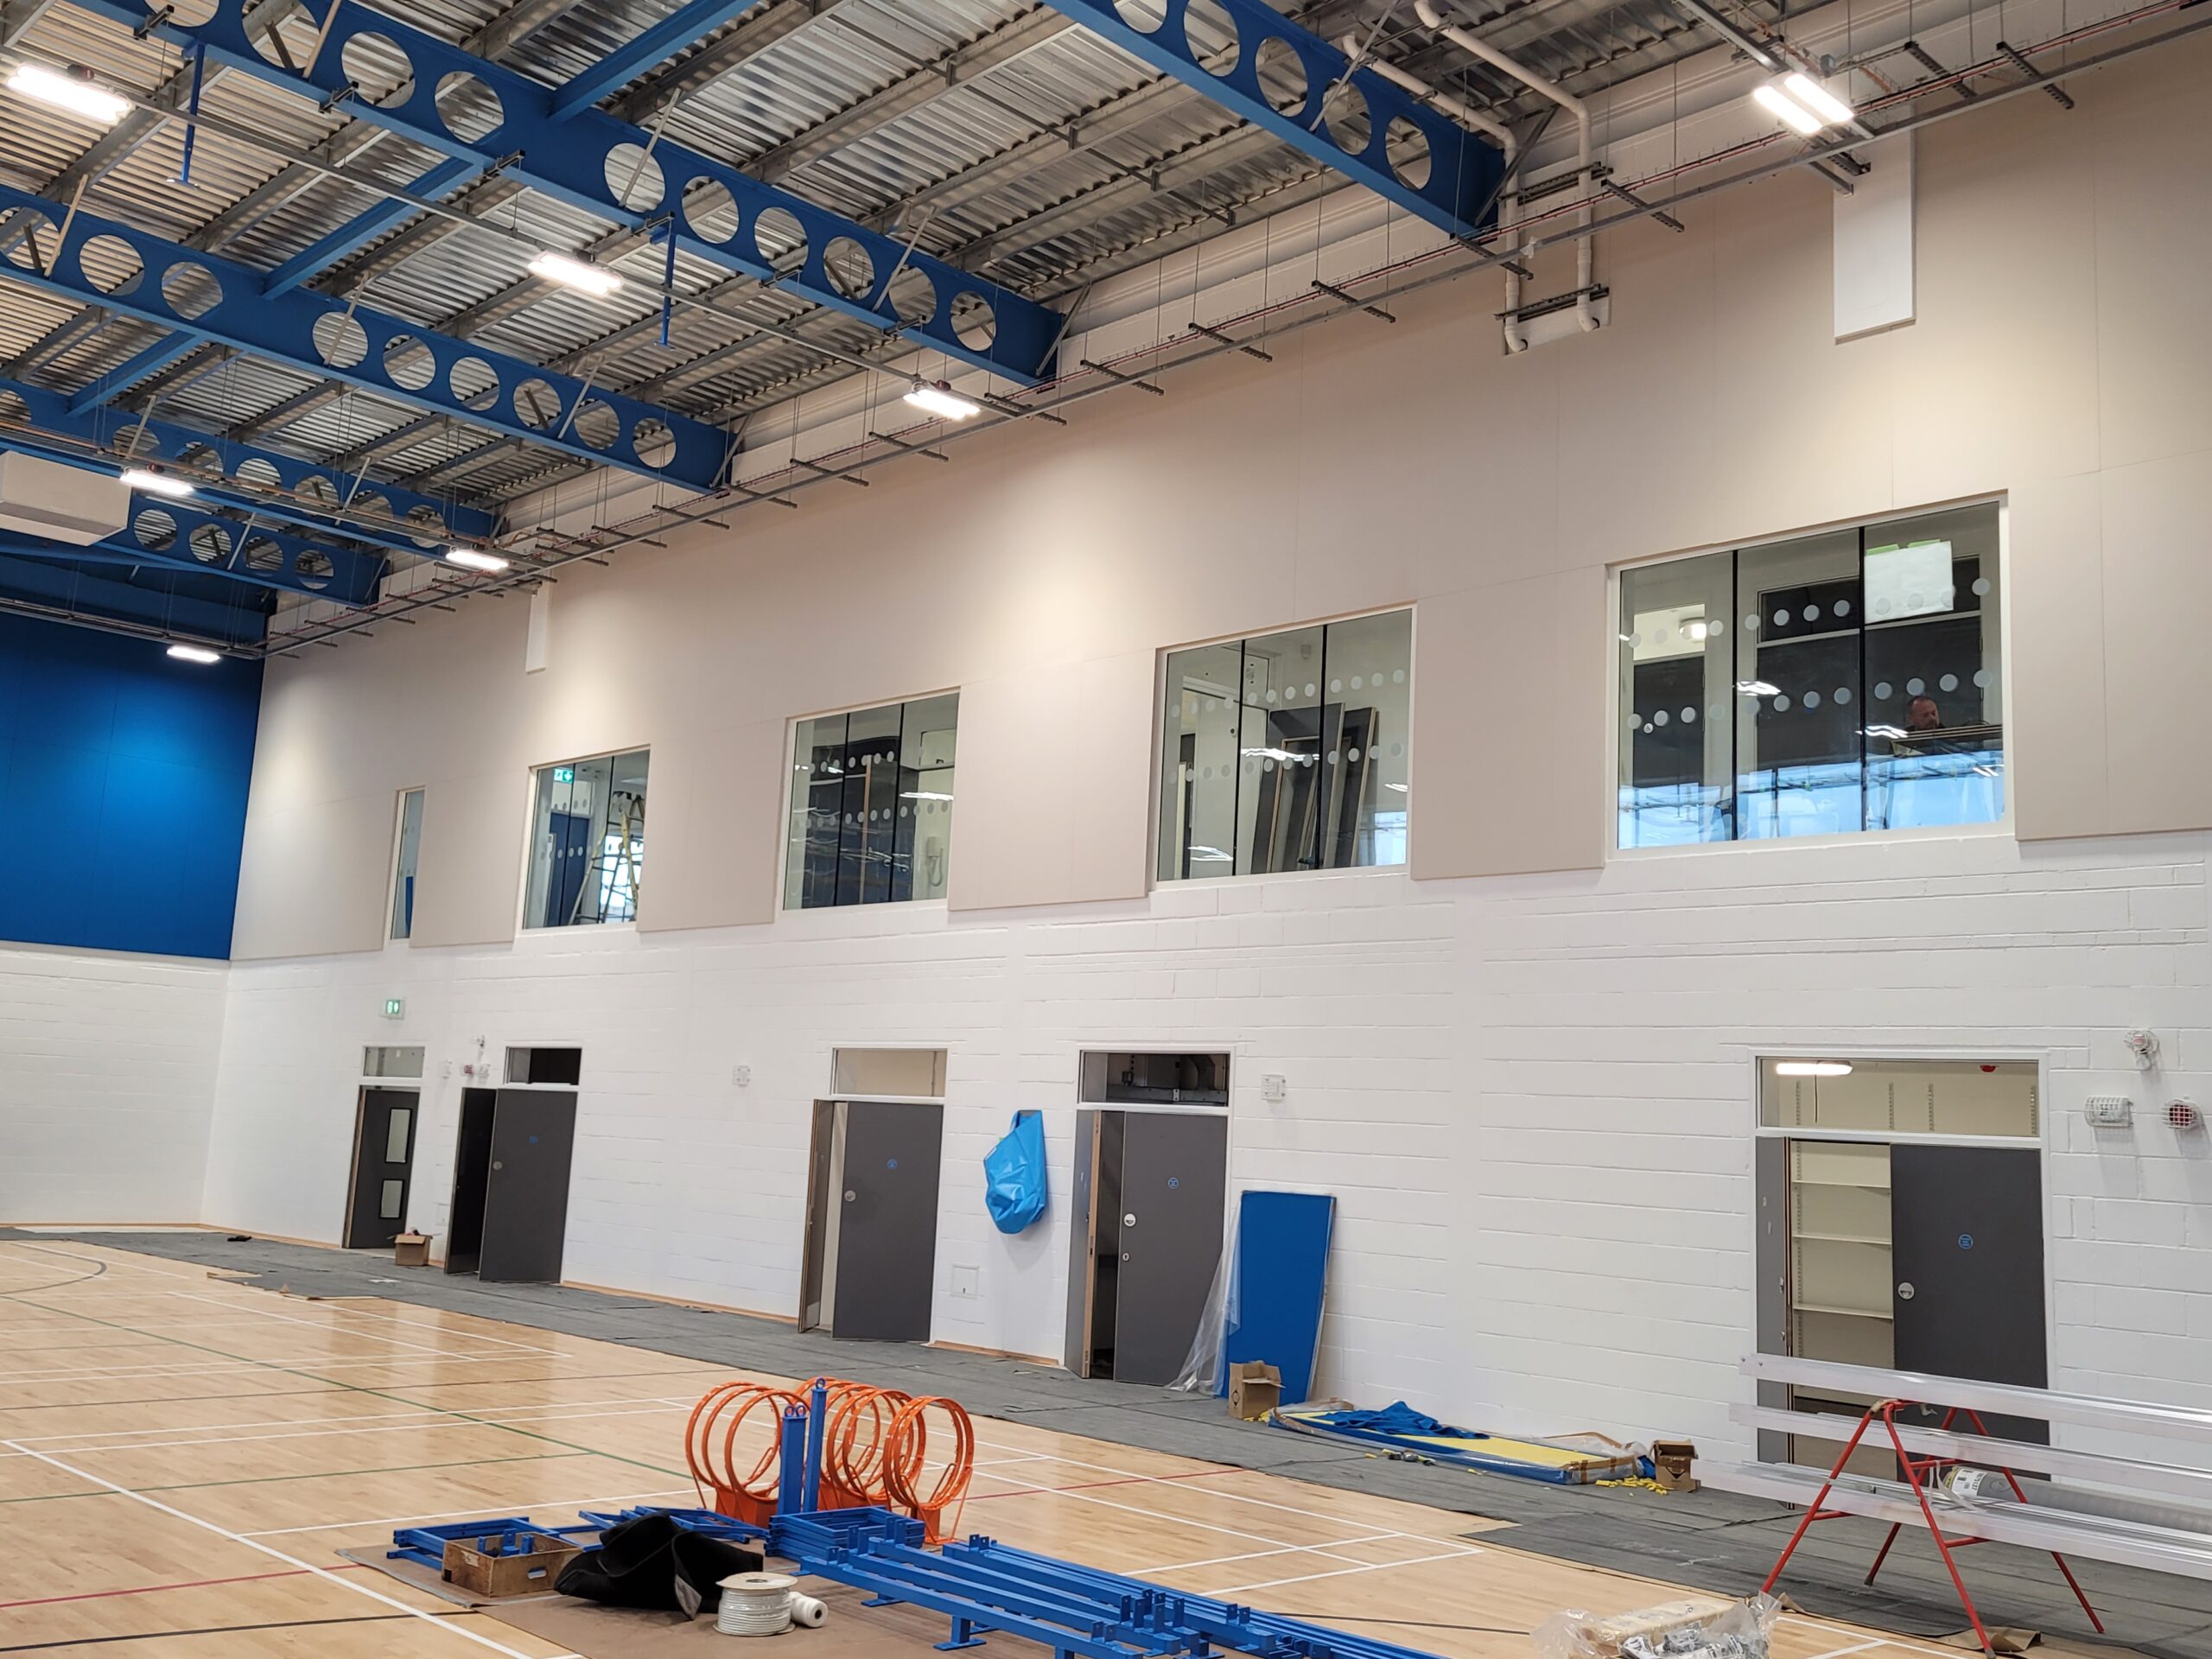 New acoustic walls fitted in a sports hall.